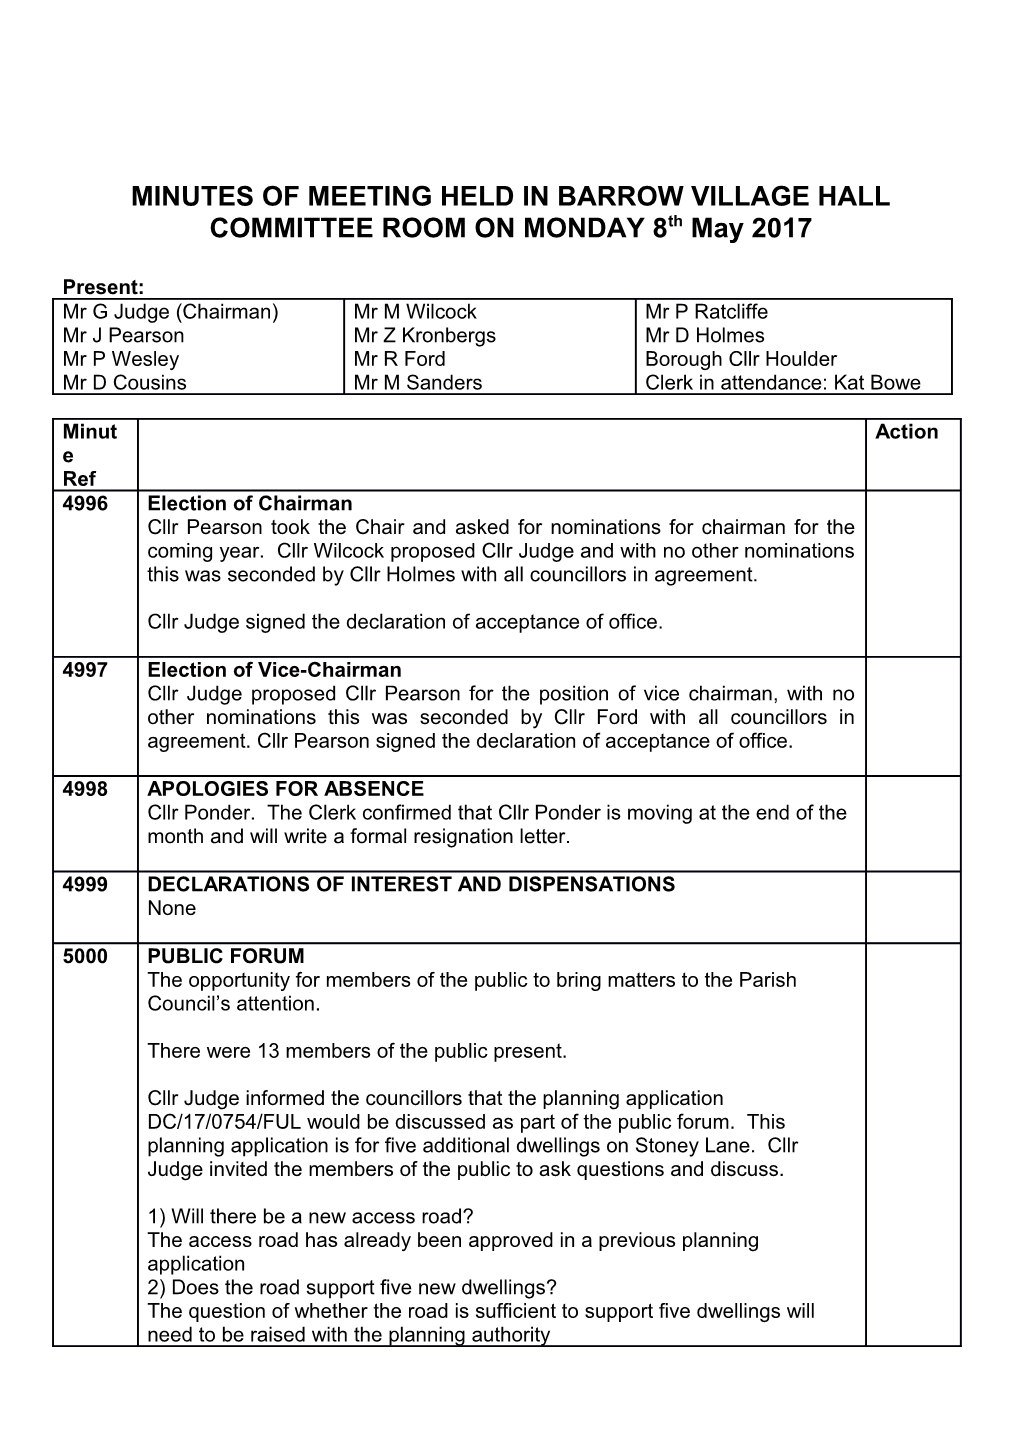 MINUTES of MEETING HELD in BARROW VILLAGE HALL COMMITTEE ROOM on MONDAY 8Th May 2017